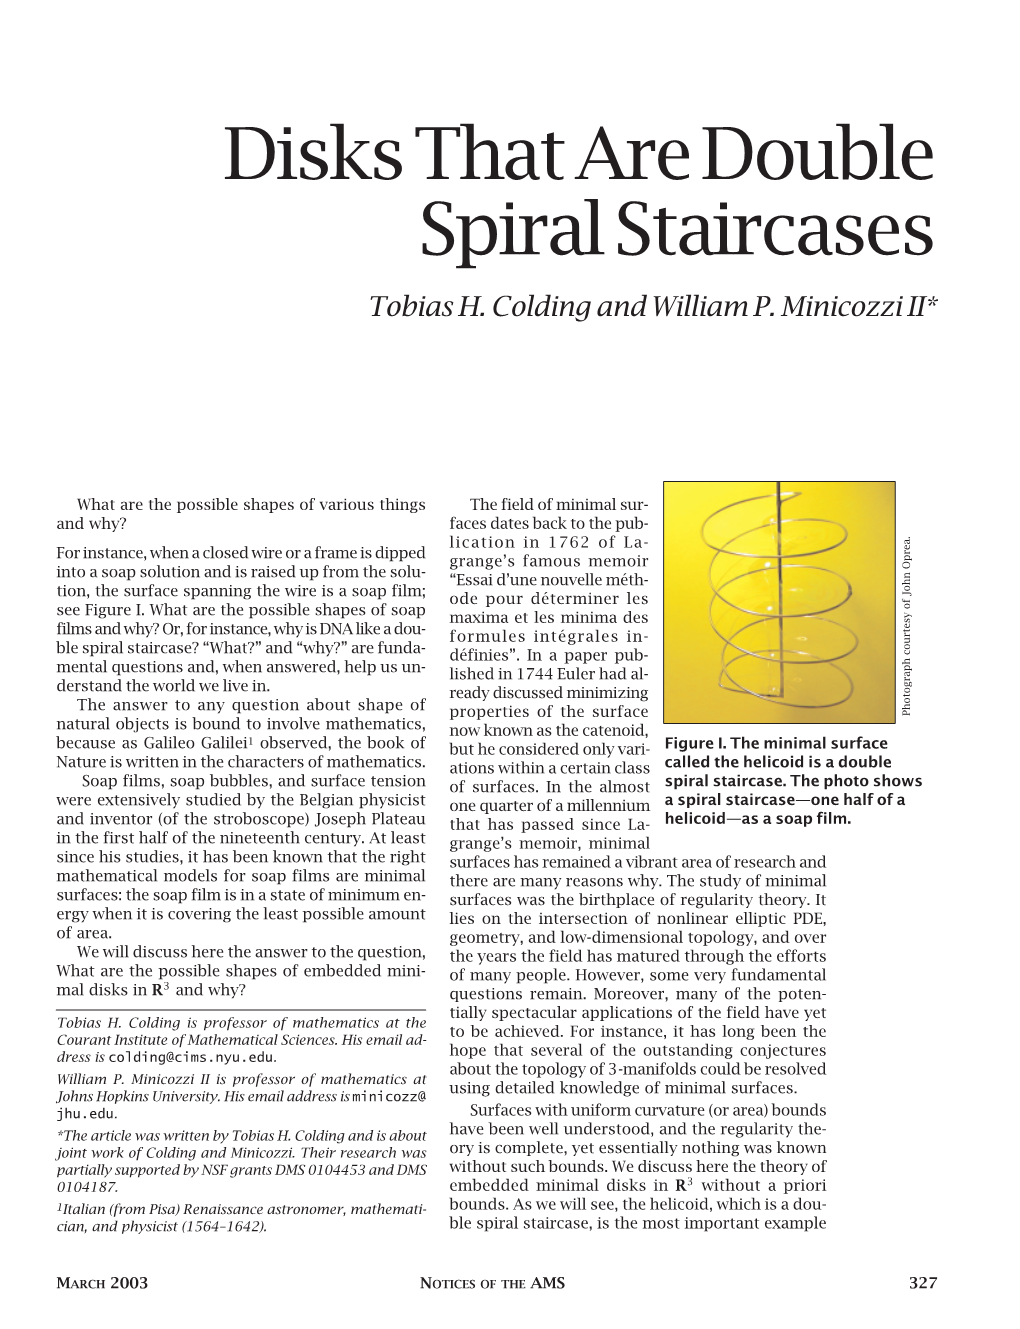 Disks That Are Double Spiral Staircases, Volume 50, Number 3